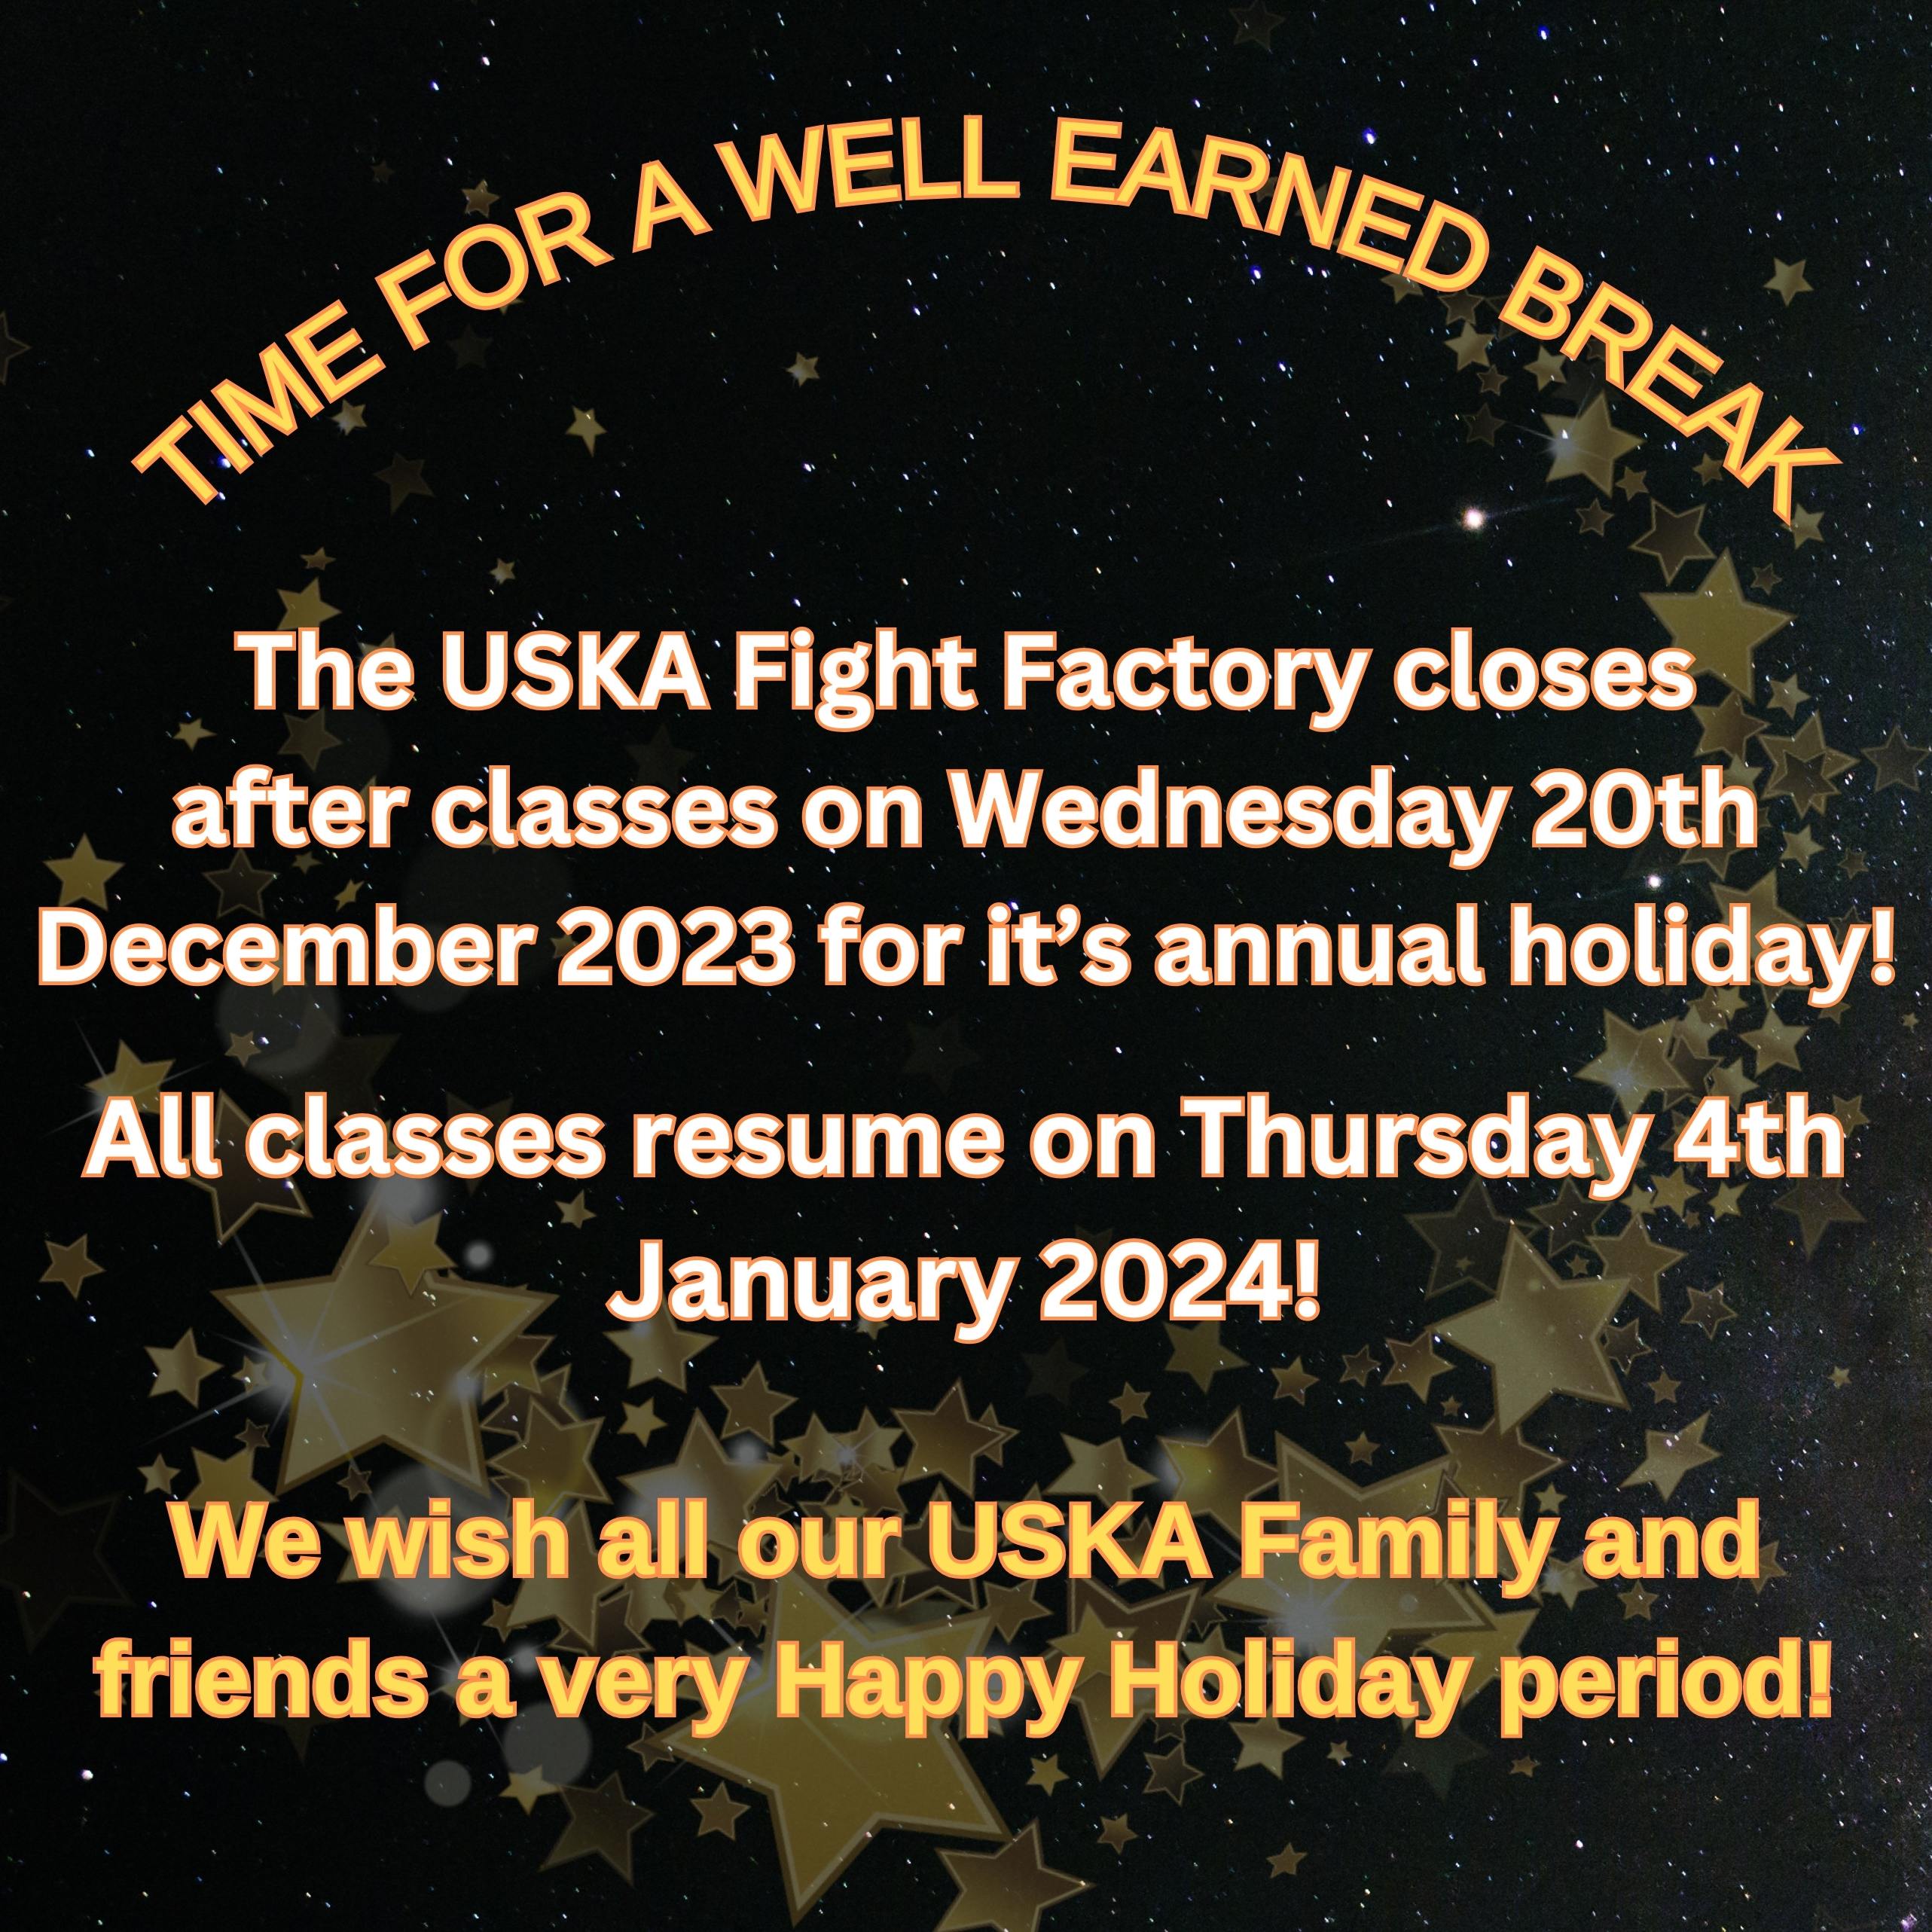 21-12-23 - USKA Fight Factory has closed for classes for it's annual Holiday from 21/12/23 until 04/01/24